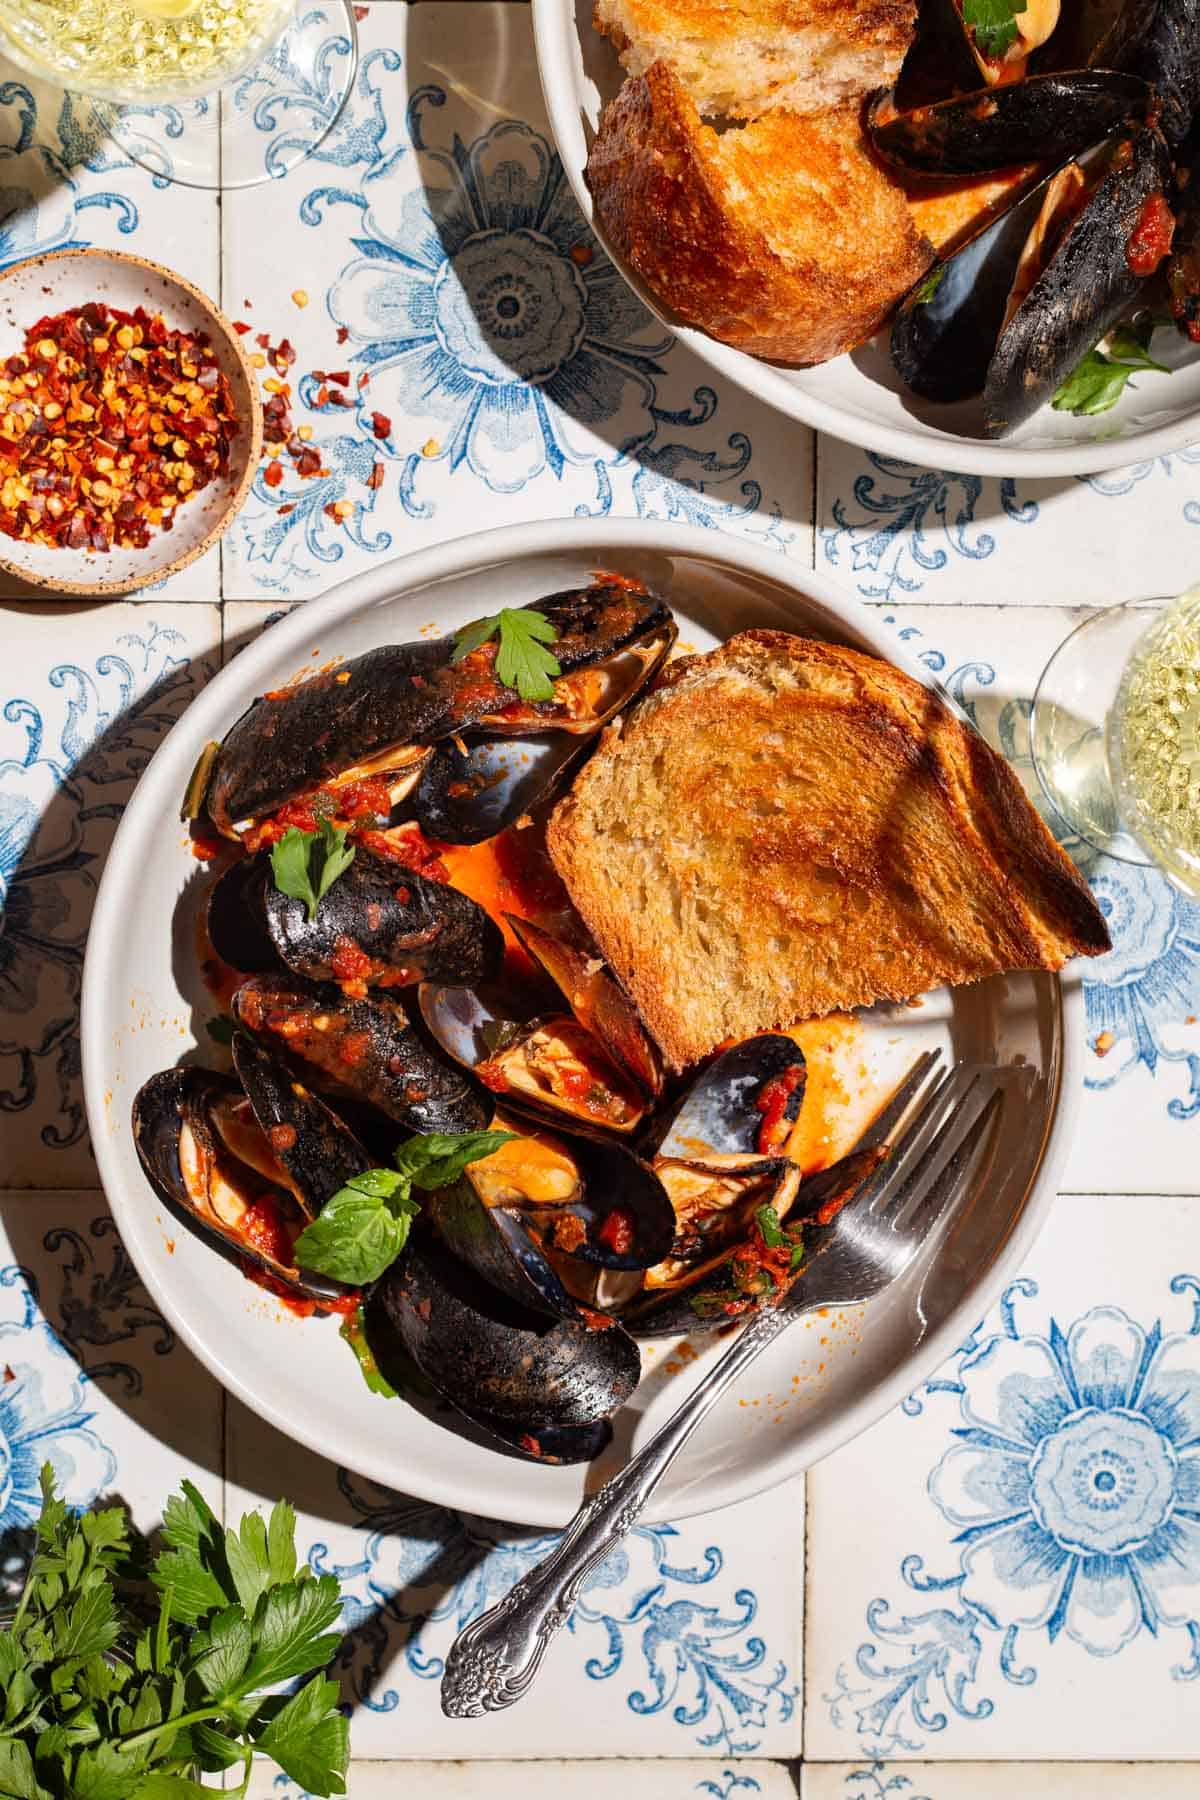 An overhead photo of mussels marinara in a bowl with a piece of toasted bread and a fork. Next to this is another serving of mussels, a bowl of red pepper flakes, parsley, and two glasses.